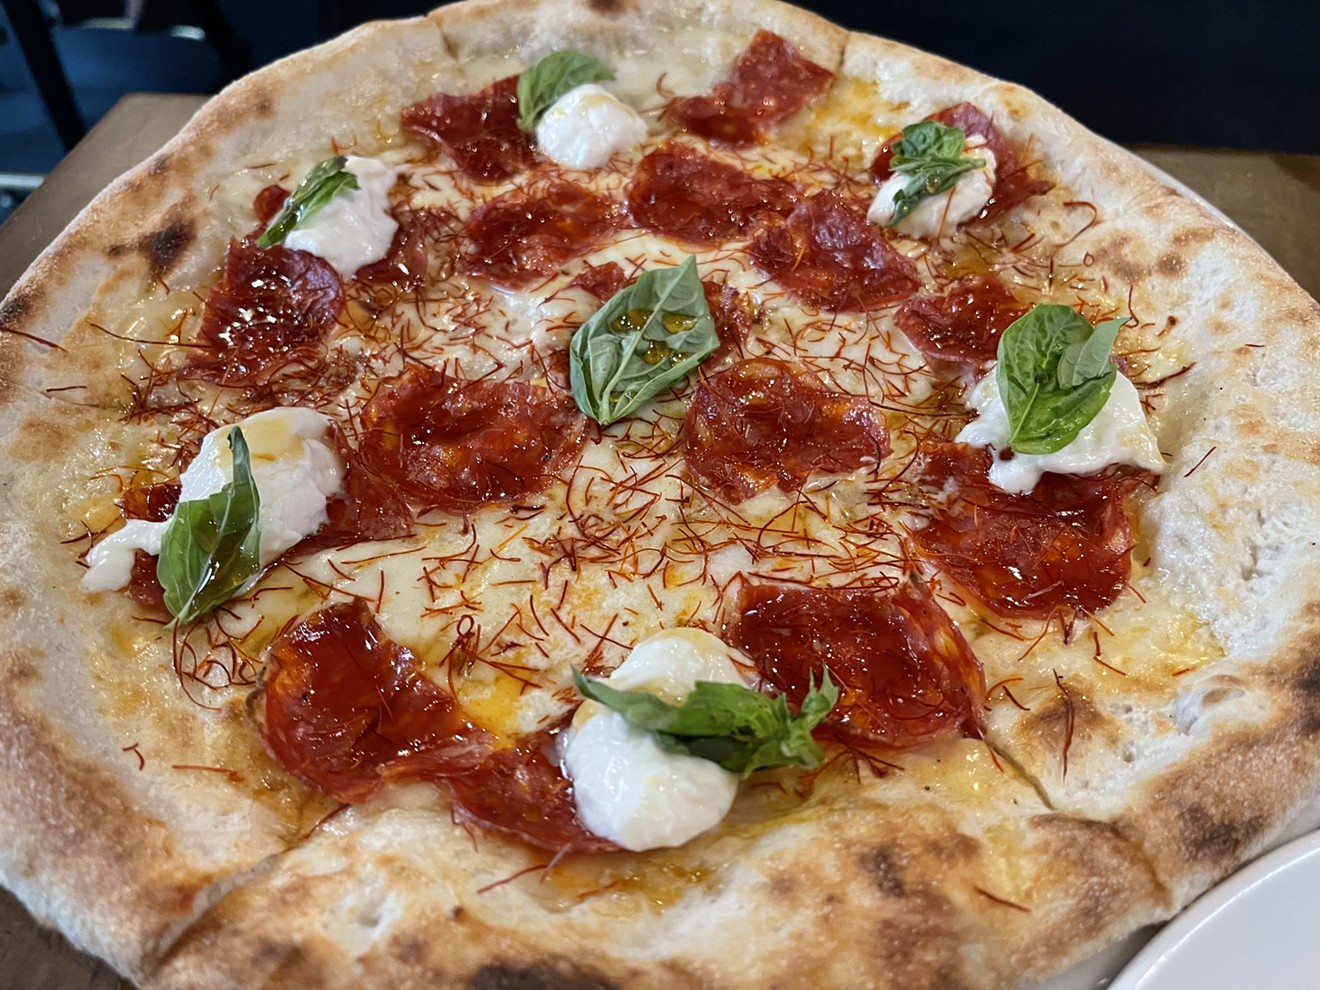 The Burratella Pizza at Pomo comes topped with chili threads and fresh basil.